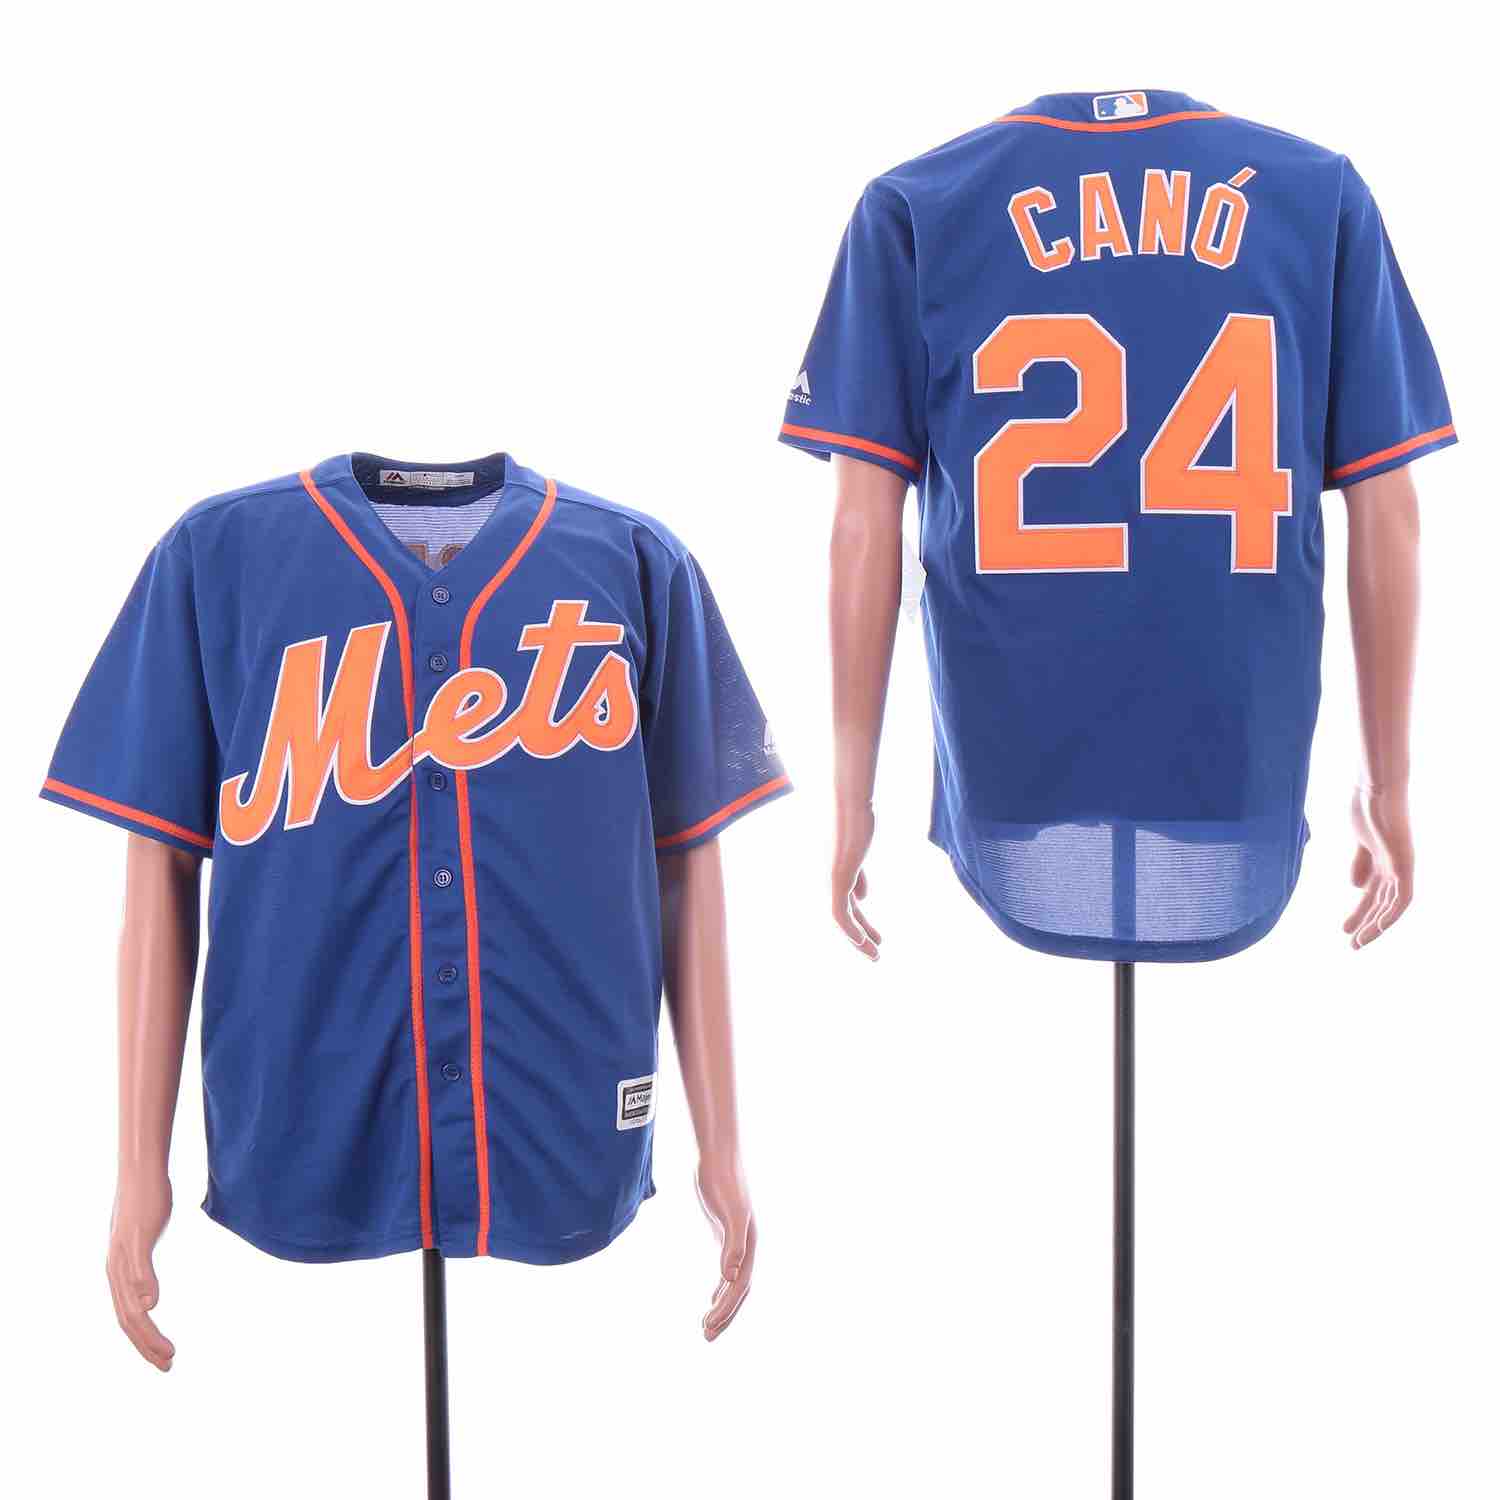 MLB New York Mets #24 Cano Blue Game Jersey